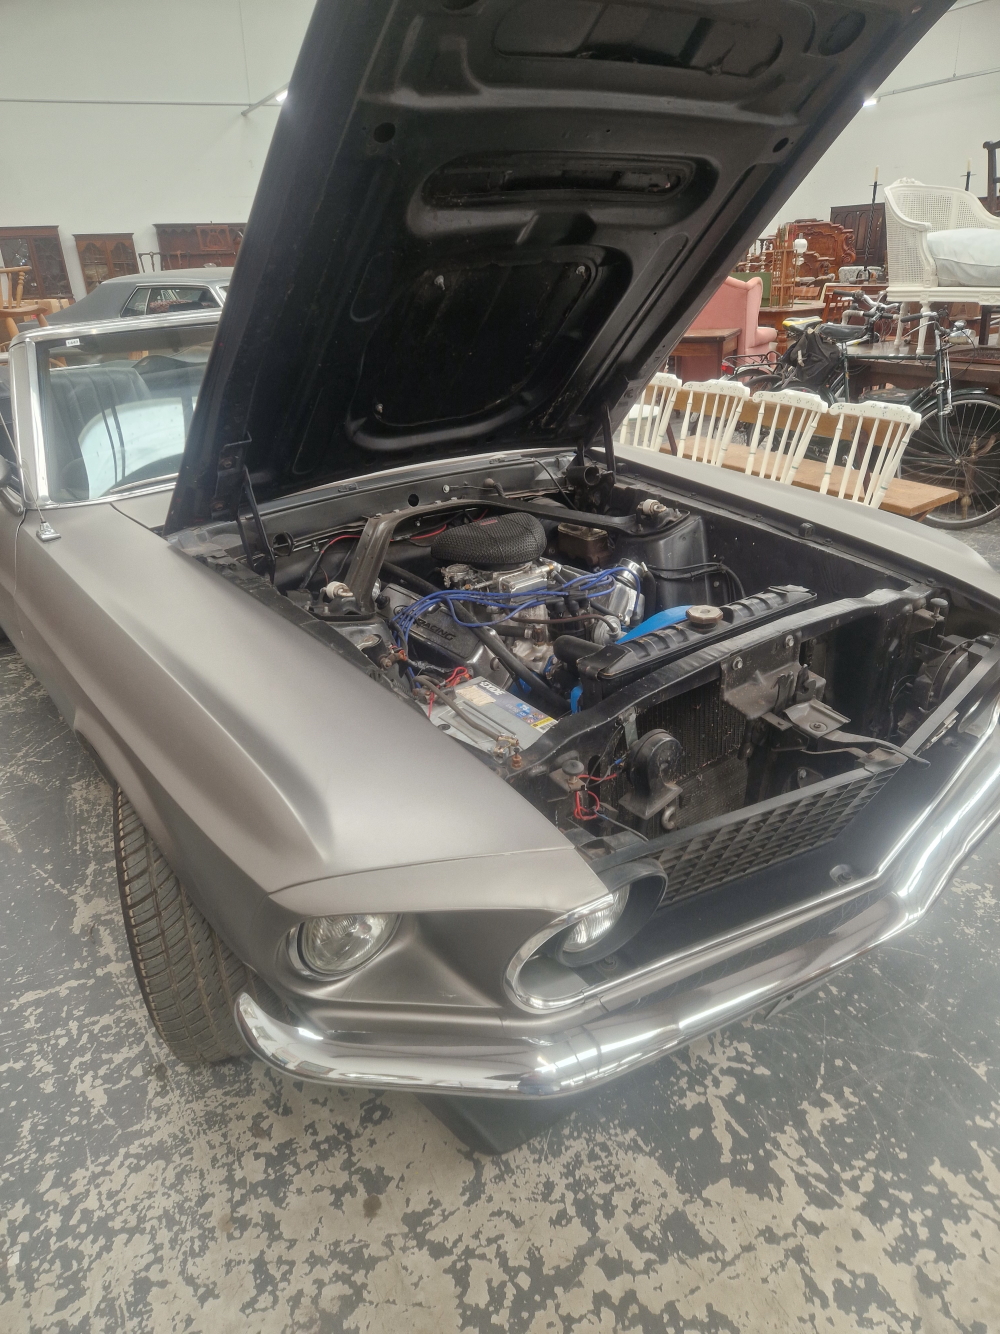 1969 FORD MUSTANG CONVERTABLE. 302 cu.in. V8 CONVERSION. WITH HOLLIE FOUR BARREL CARB. ELECTRIC - Image 9 of 19